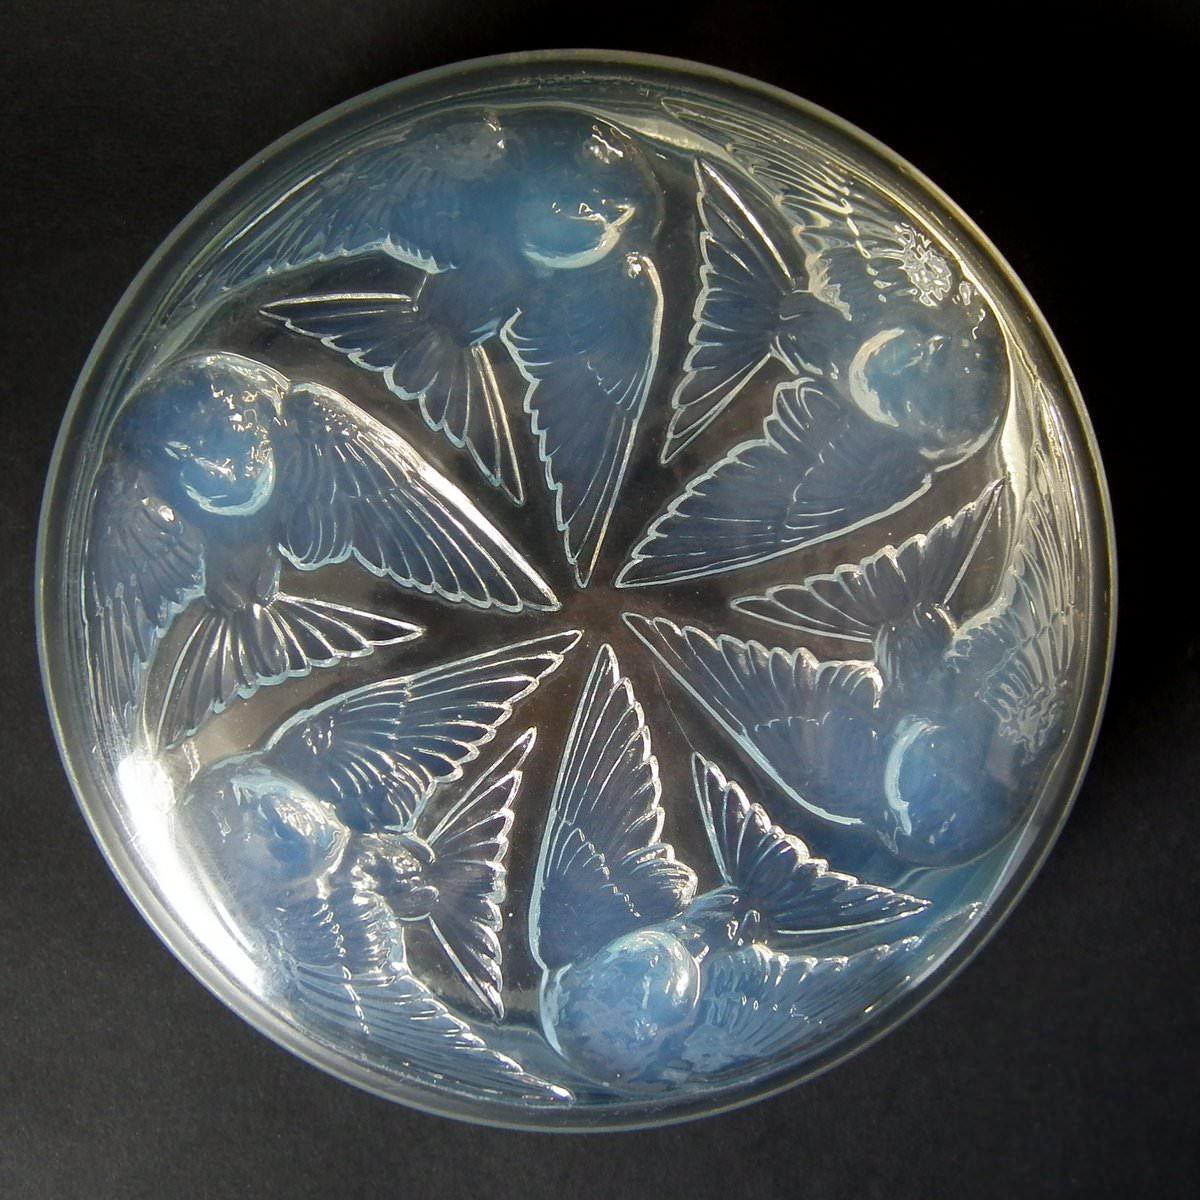 Rene Lalique opalescent glass 'Mesanges' box. This pattern features birds (tits) in a circular pattern around the lid. Moulded, 'R. Lalique' & Engraved, 'R. Lalique France No.52'. Book reference: Marcilhac 52.